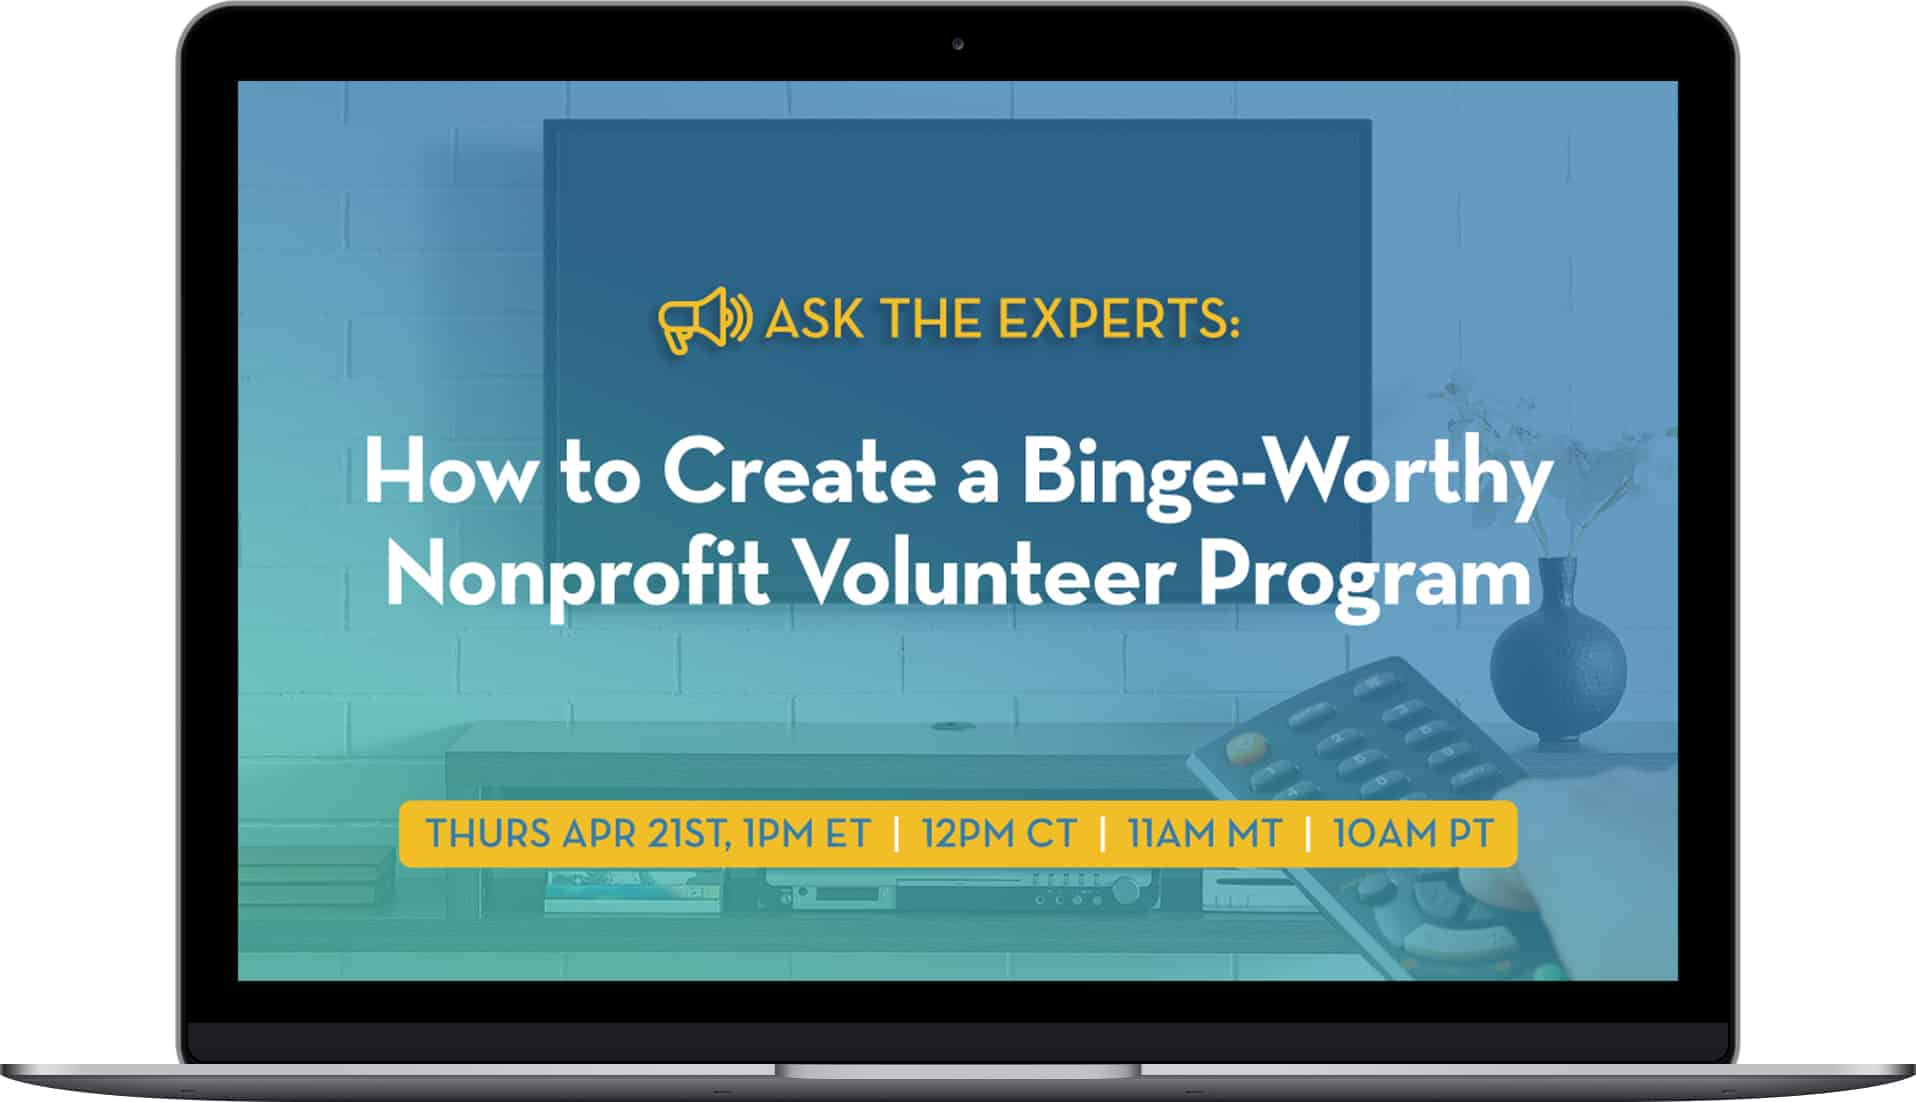 Ask the Experts: How to Create a Binge-Worthy Nonprofit Volunteer Program-laptop